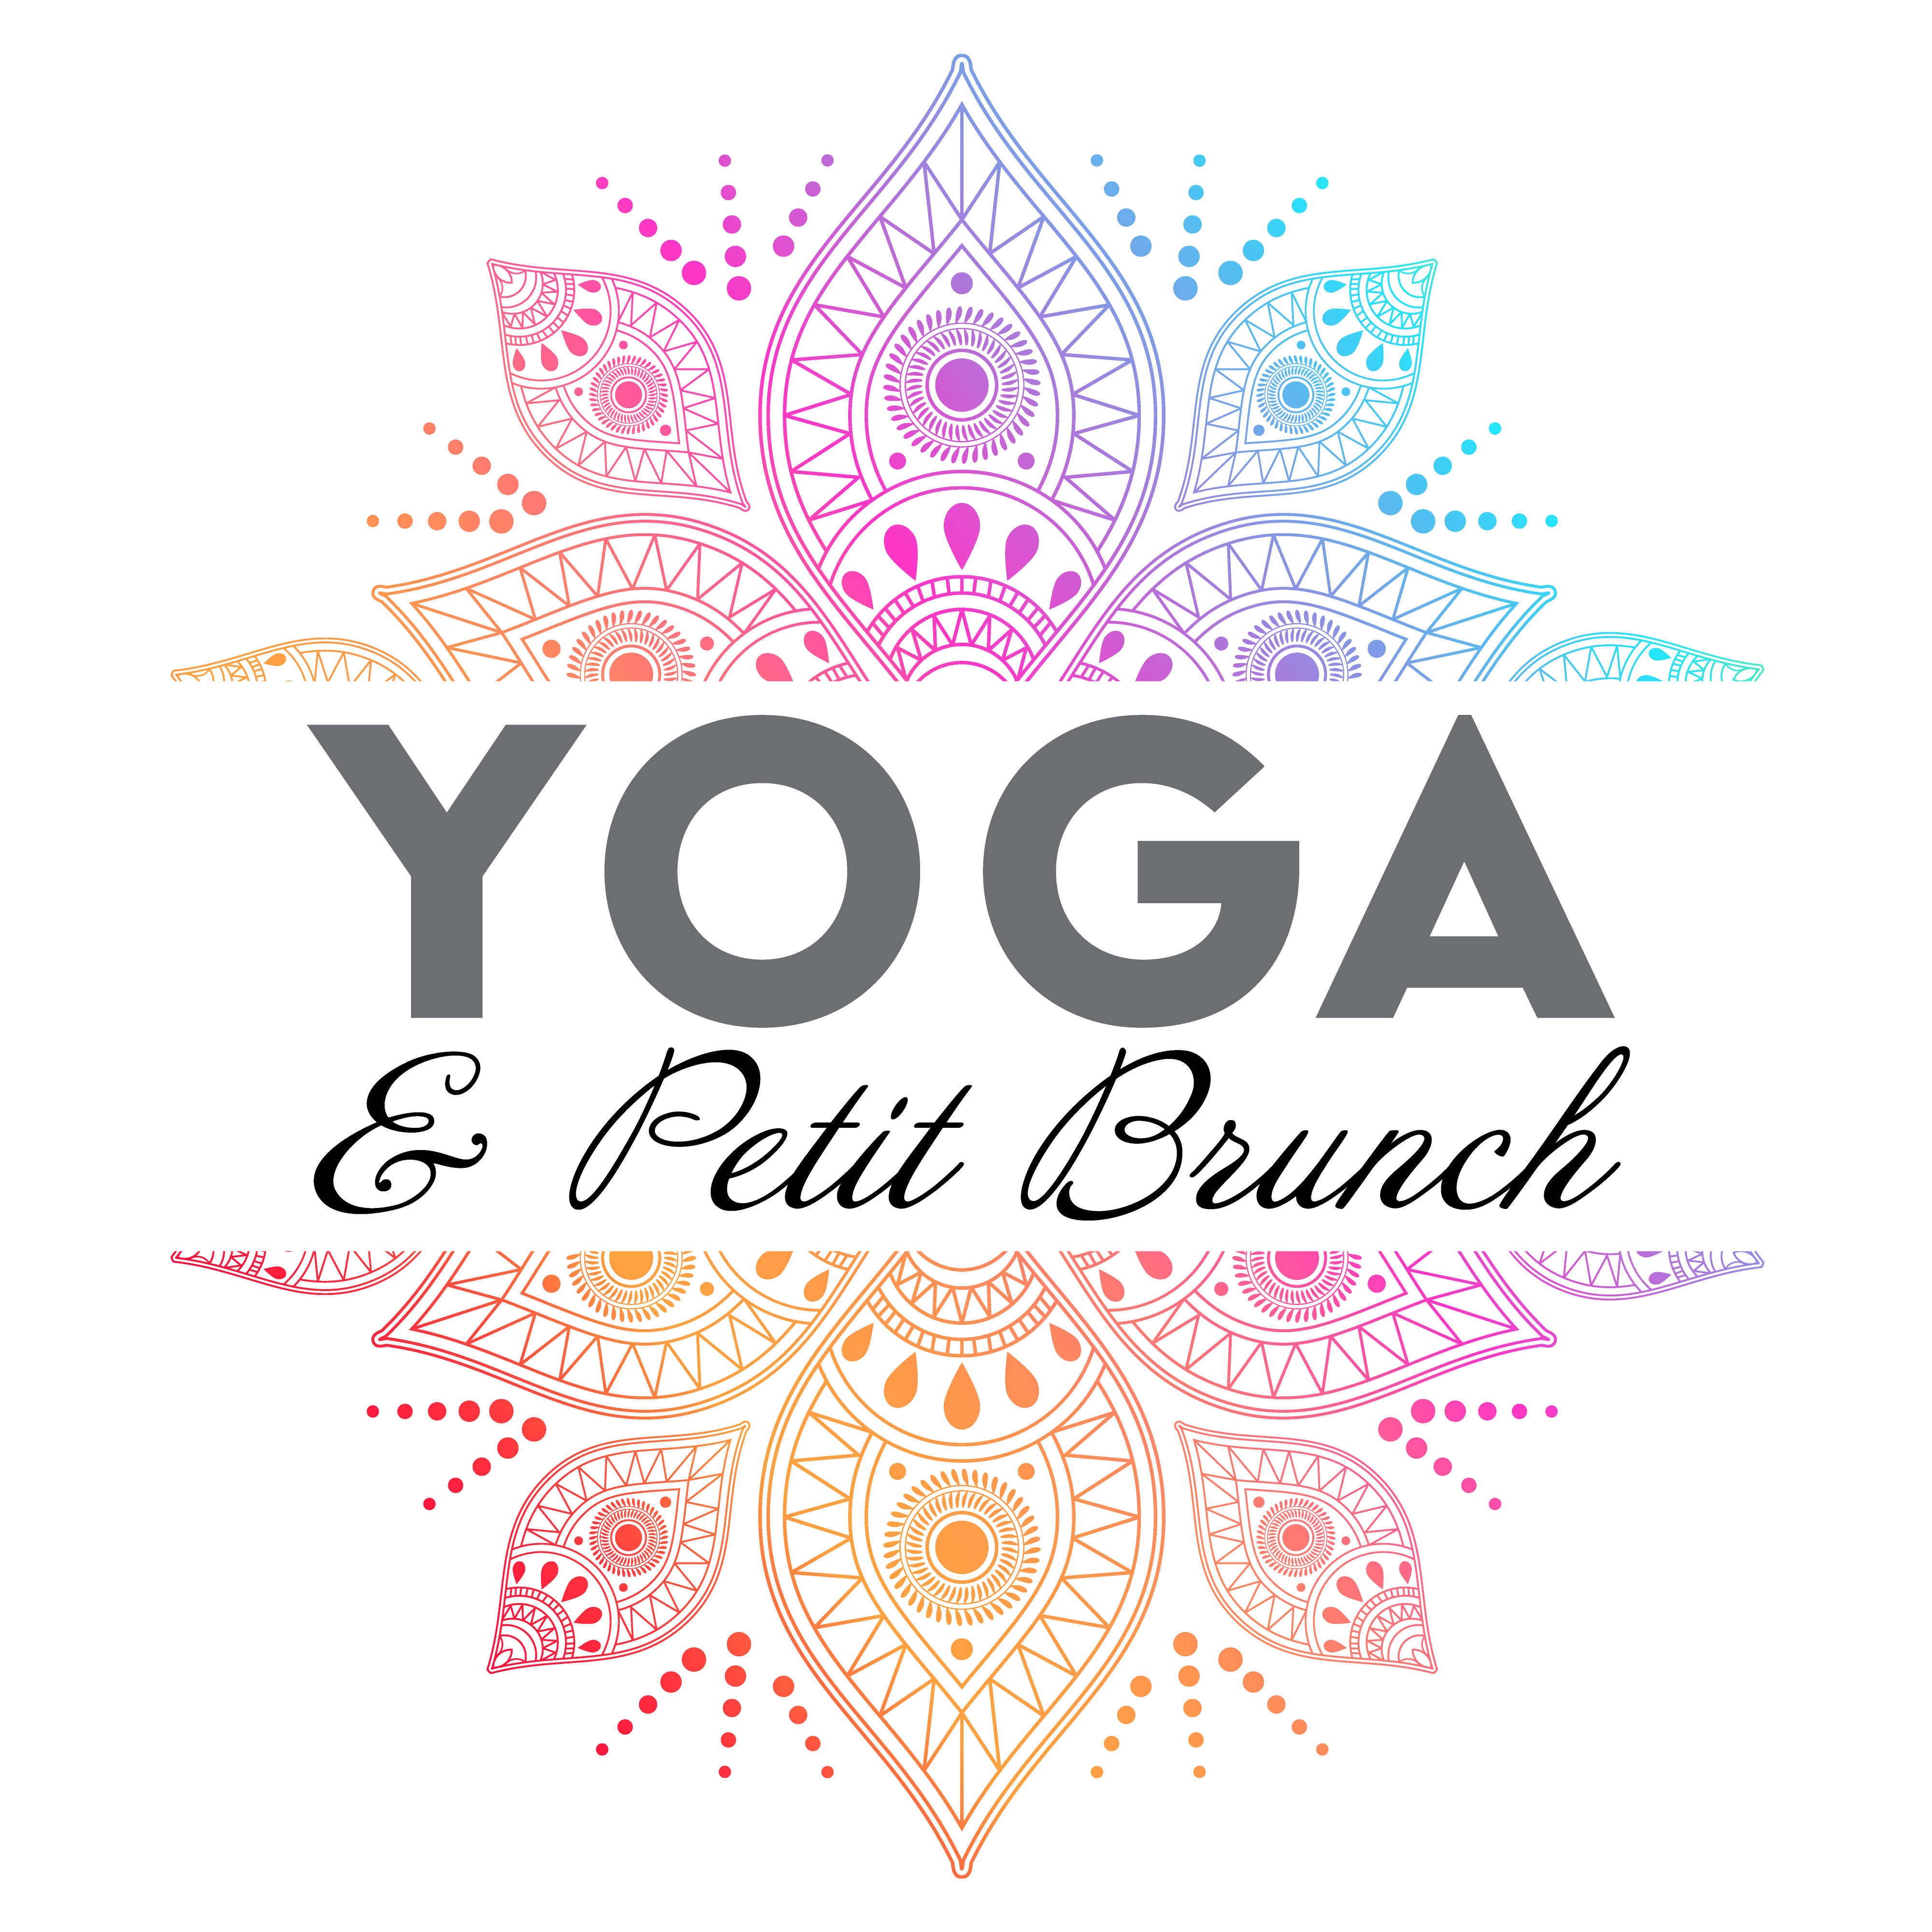 Yoga and Brunch - The Crossover